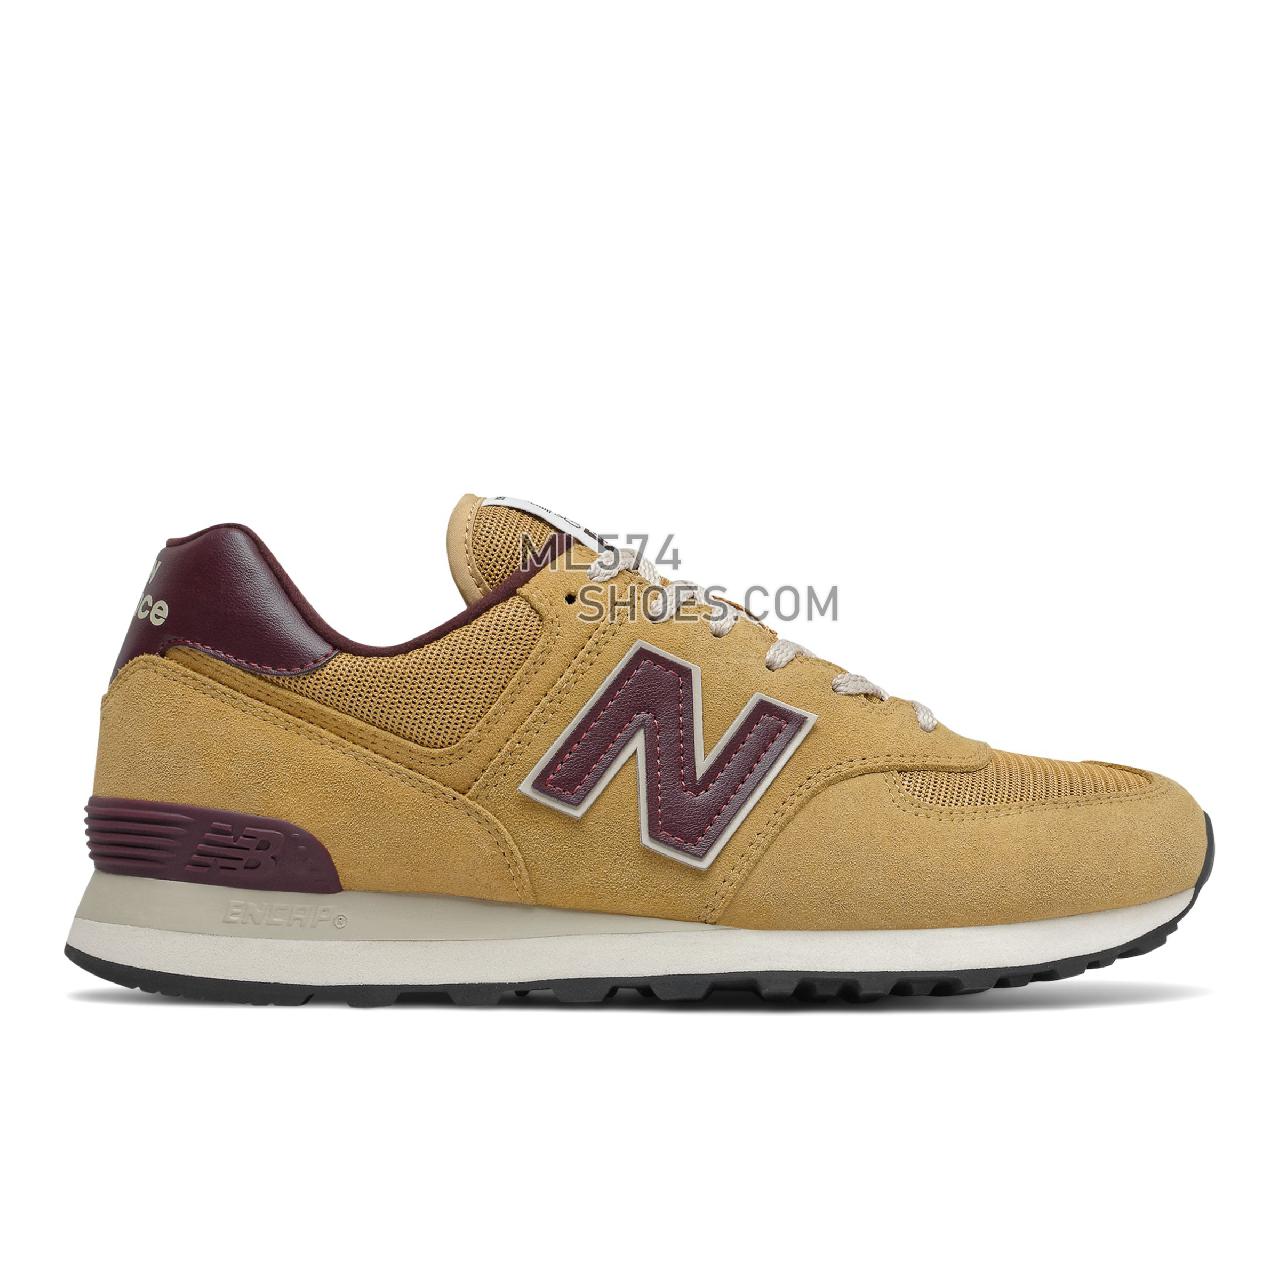 New Balance 574v2 - Unisex Men's Women's Classic Sneakers - Workwear with Henna - ML574BF2